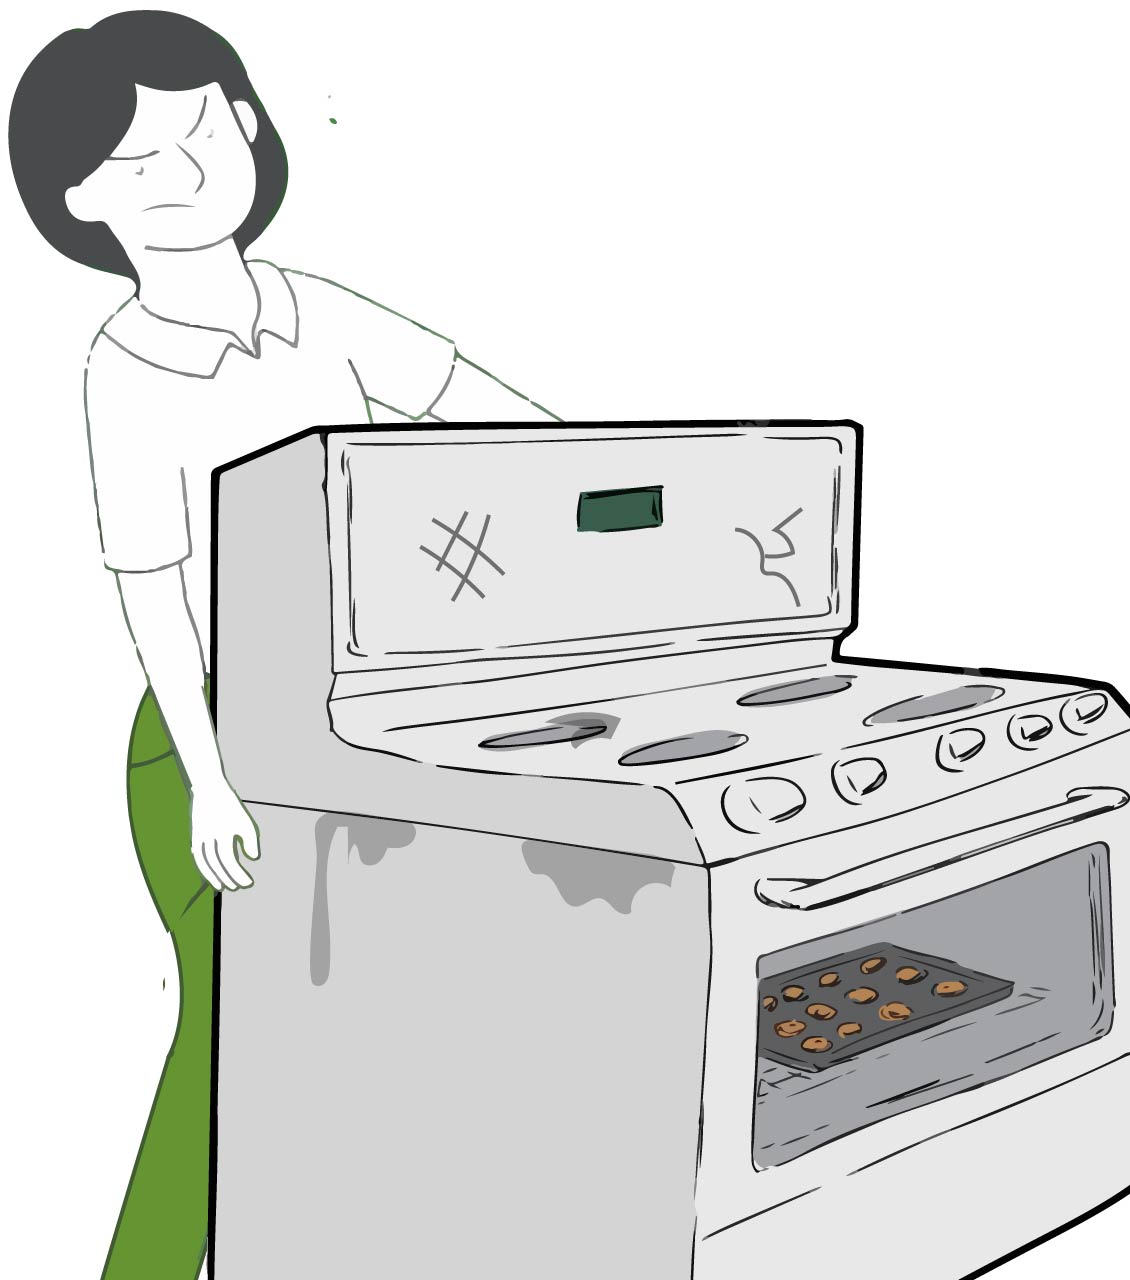 Syracuse oven removal services